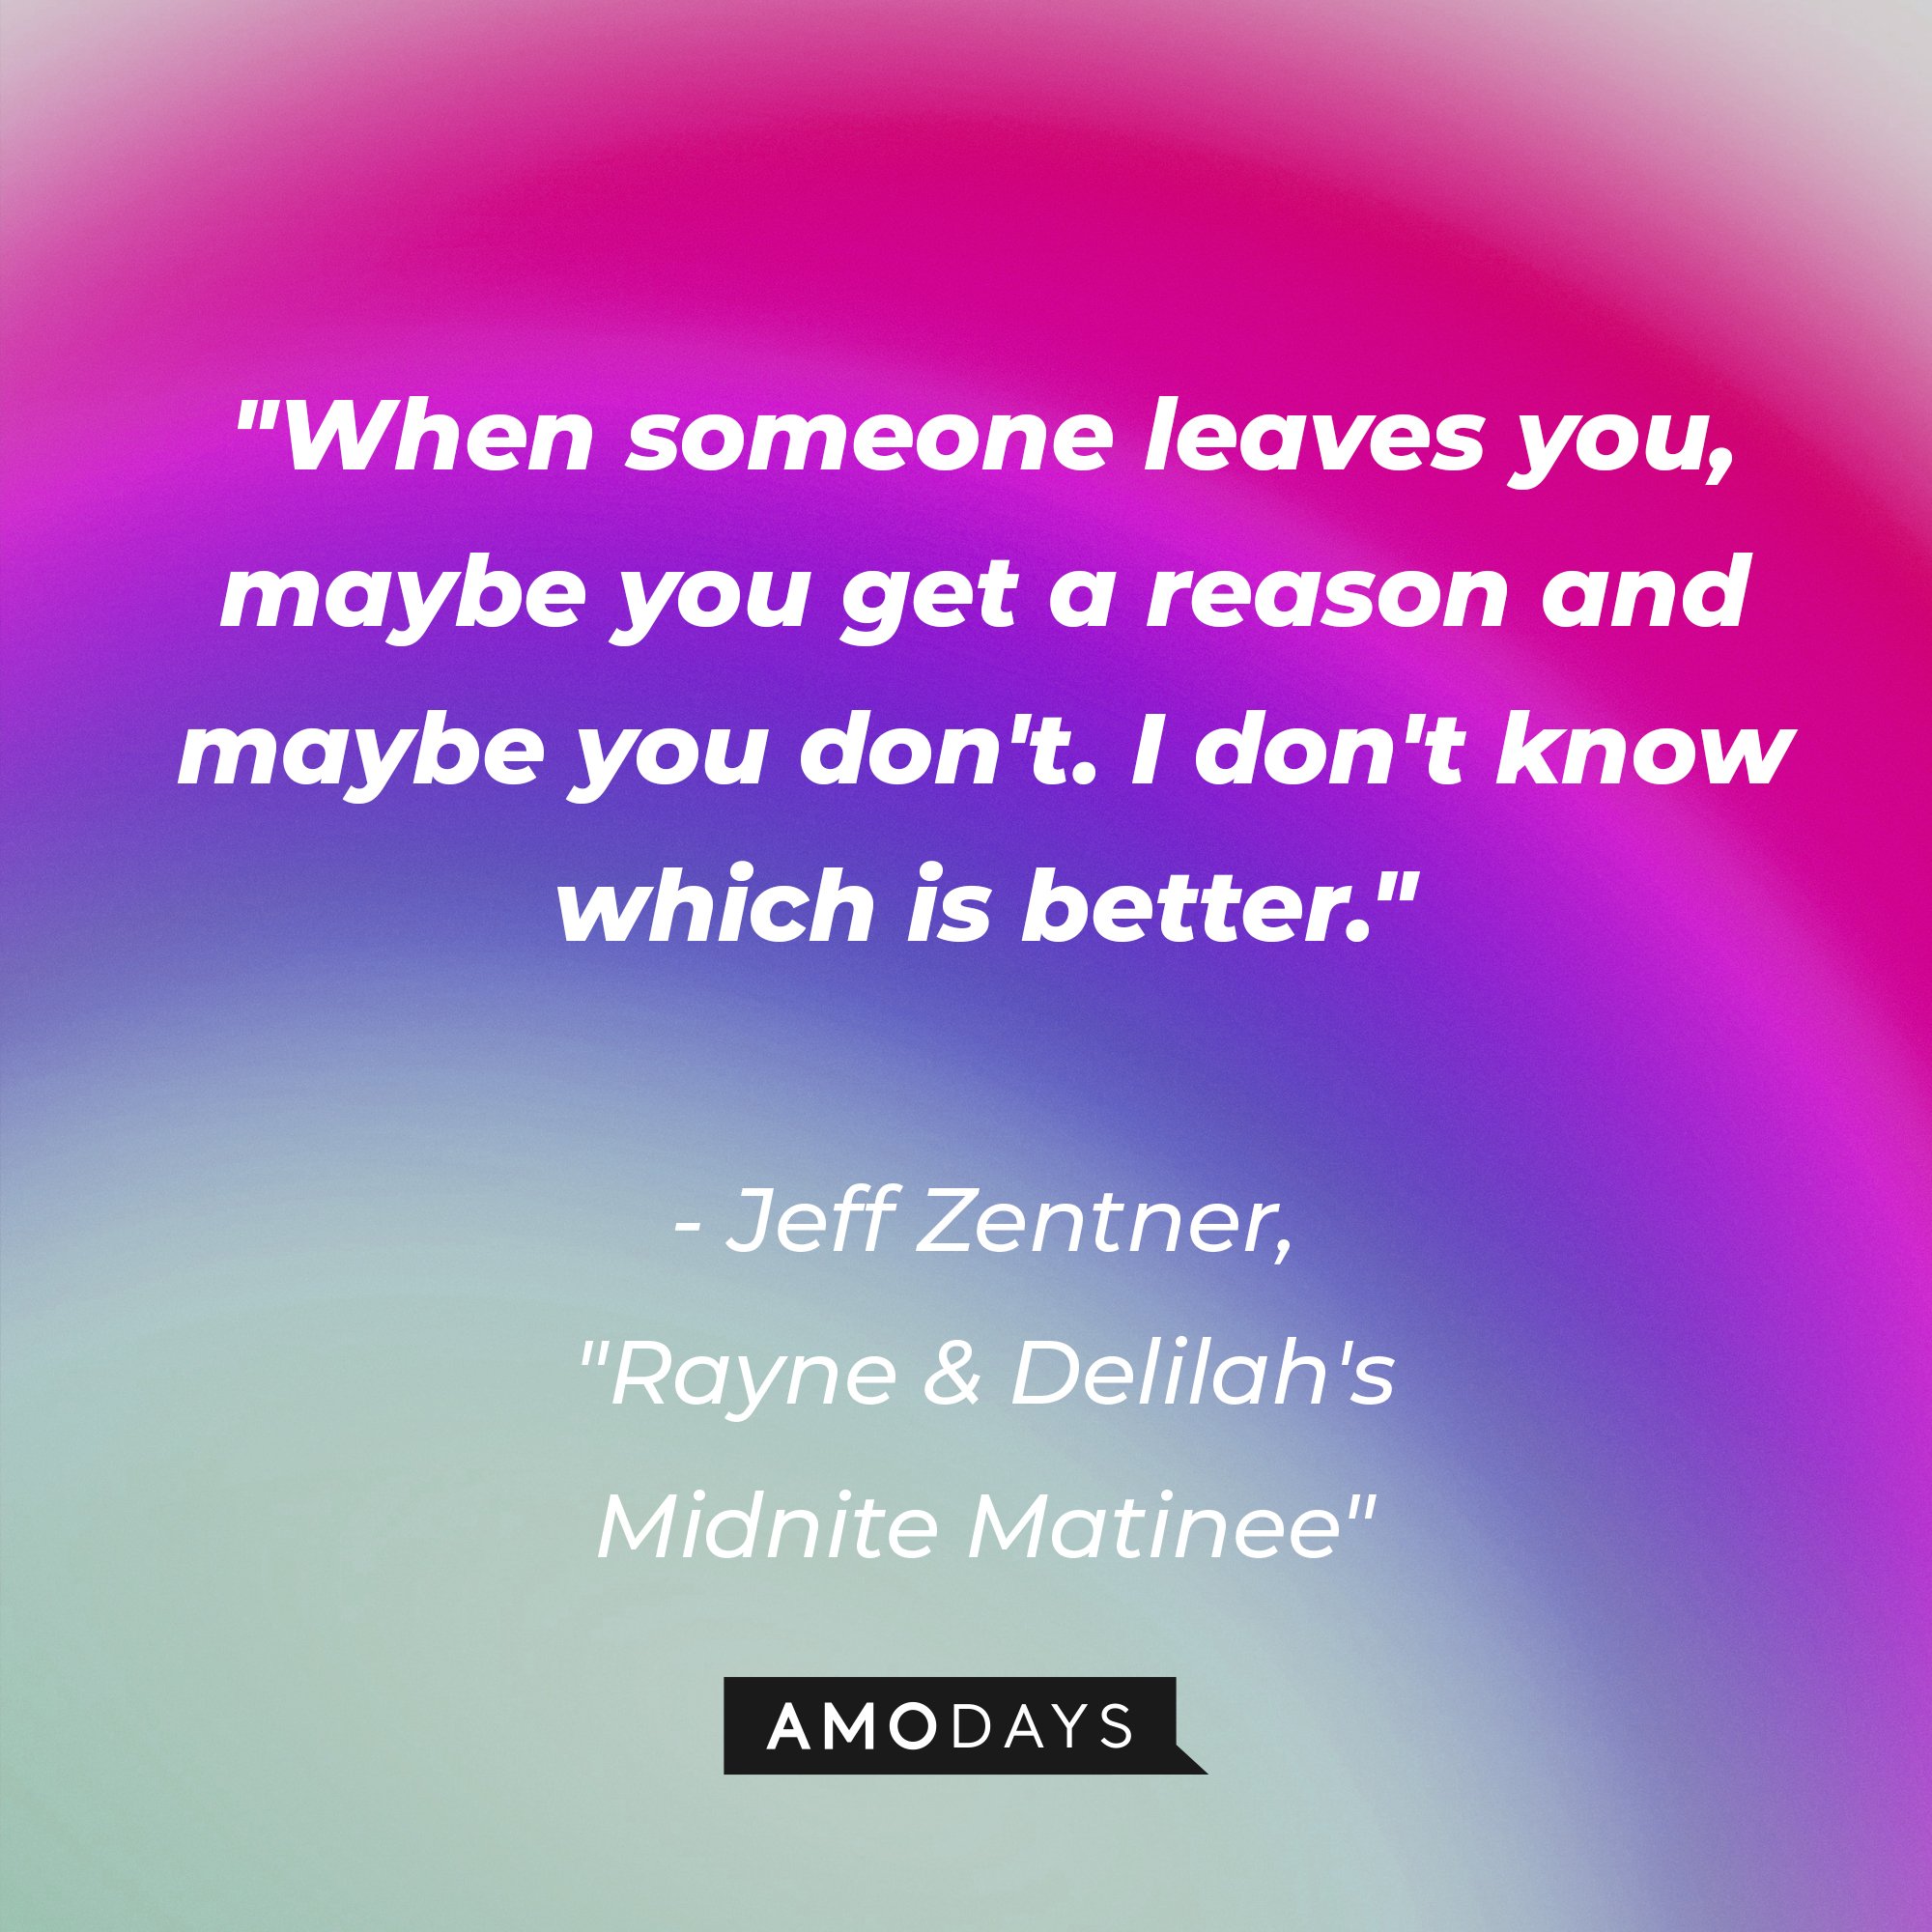 Jeff Zentner's "Rayne & Delilah's Midnite Matinee" quote: "When someone leaves you, maybe you get a reason and maybe you don't. I don't know which is better." | Image: AmoDays